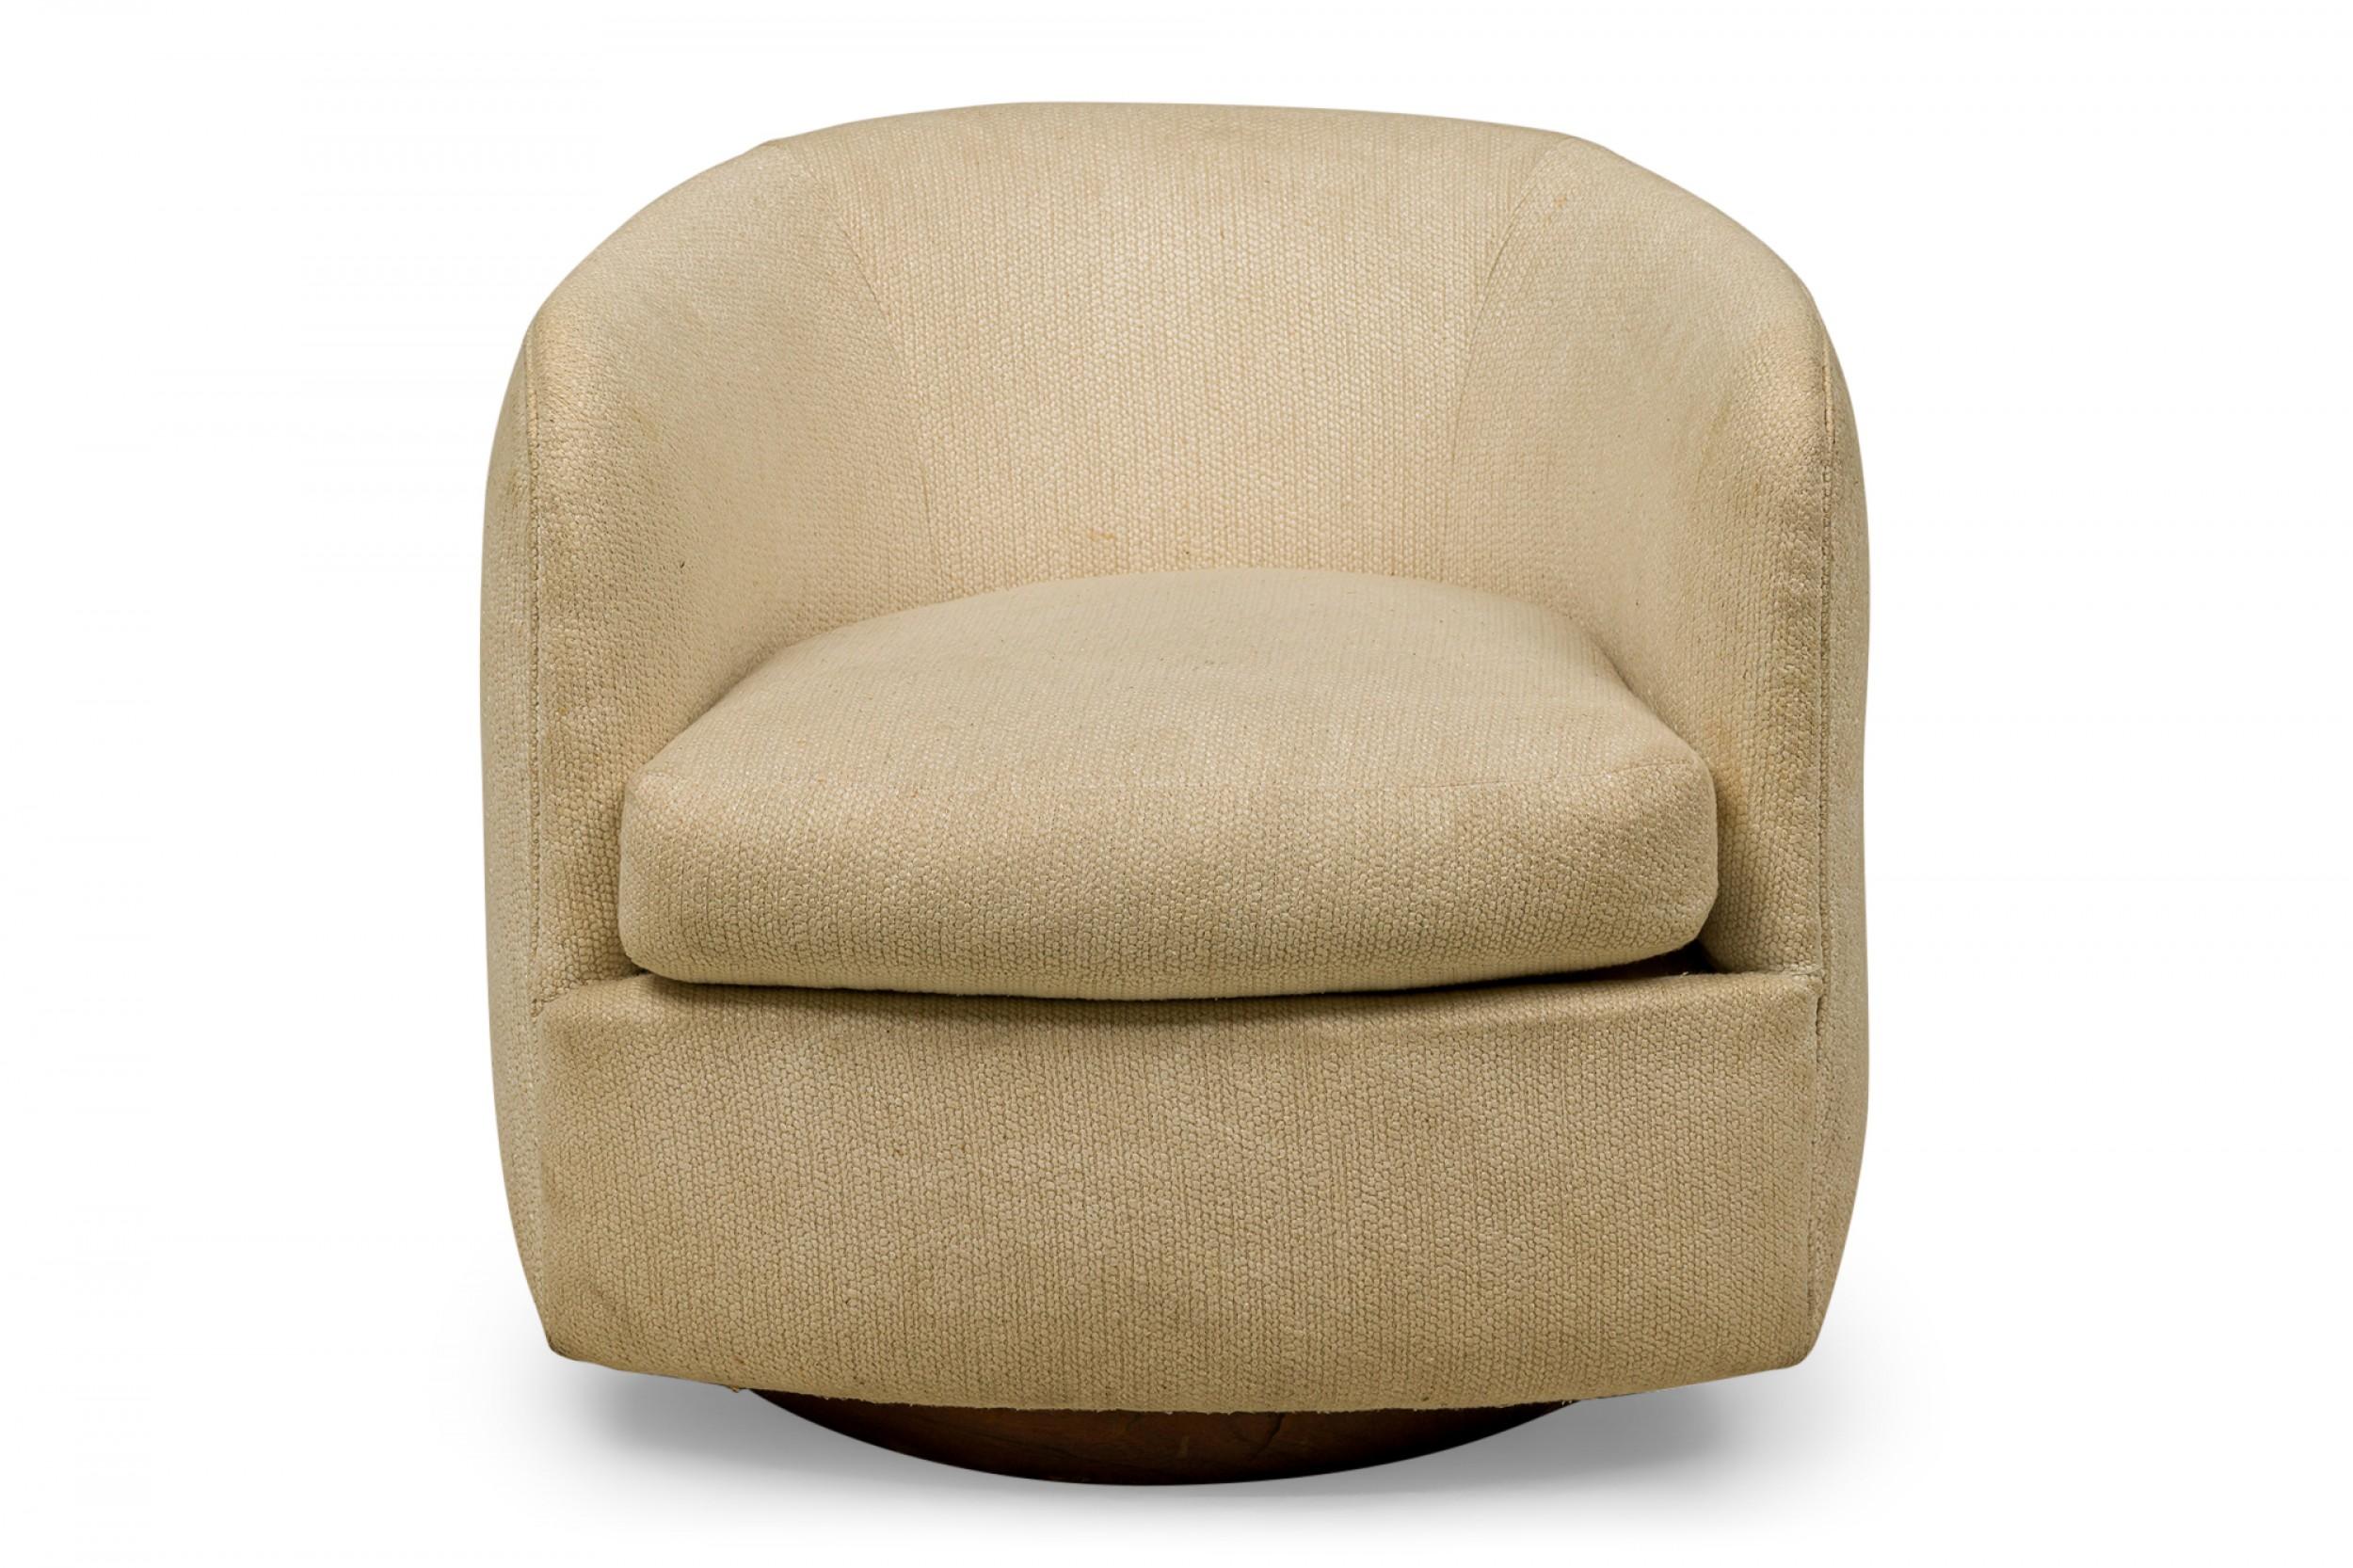 American mid-century horseshoe-form lounge / armchair with off-white fabric upholstery and a removable seat cushion. (Milo Baughman for Thayer Coggin).